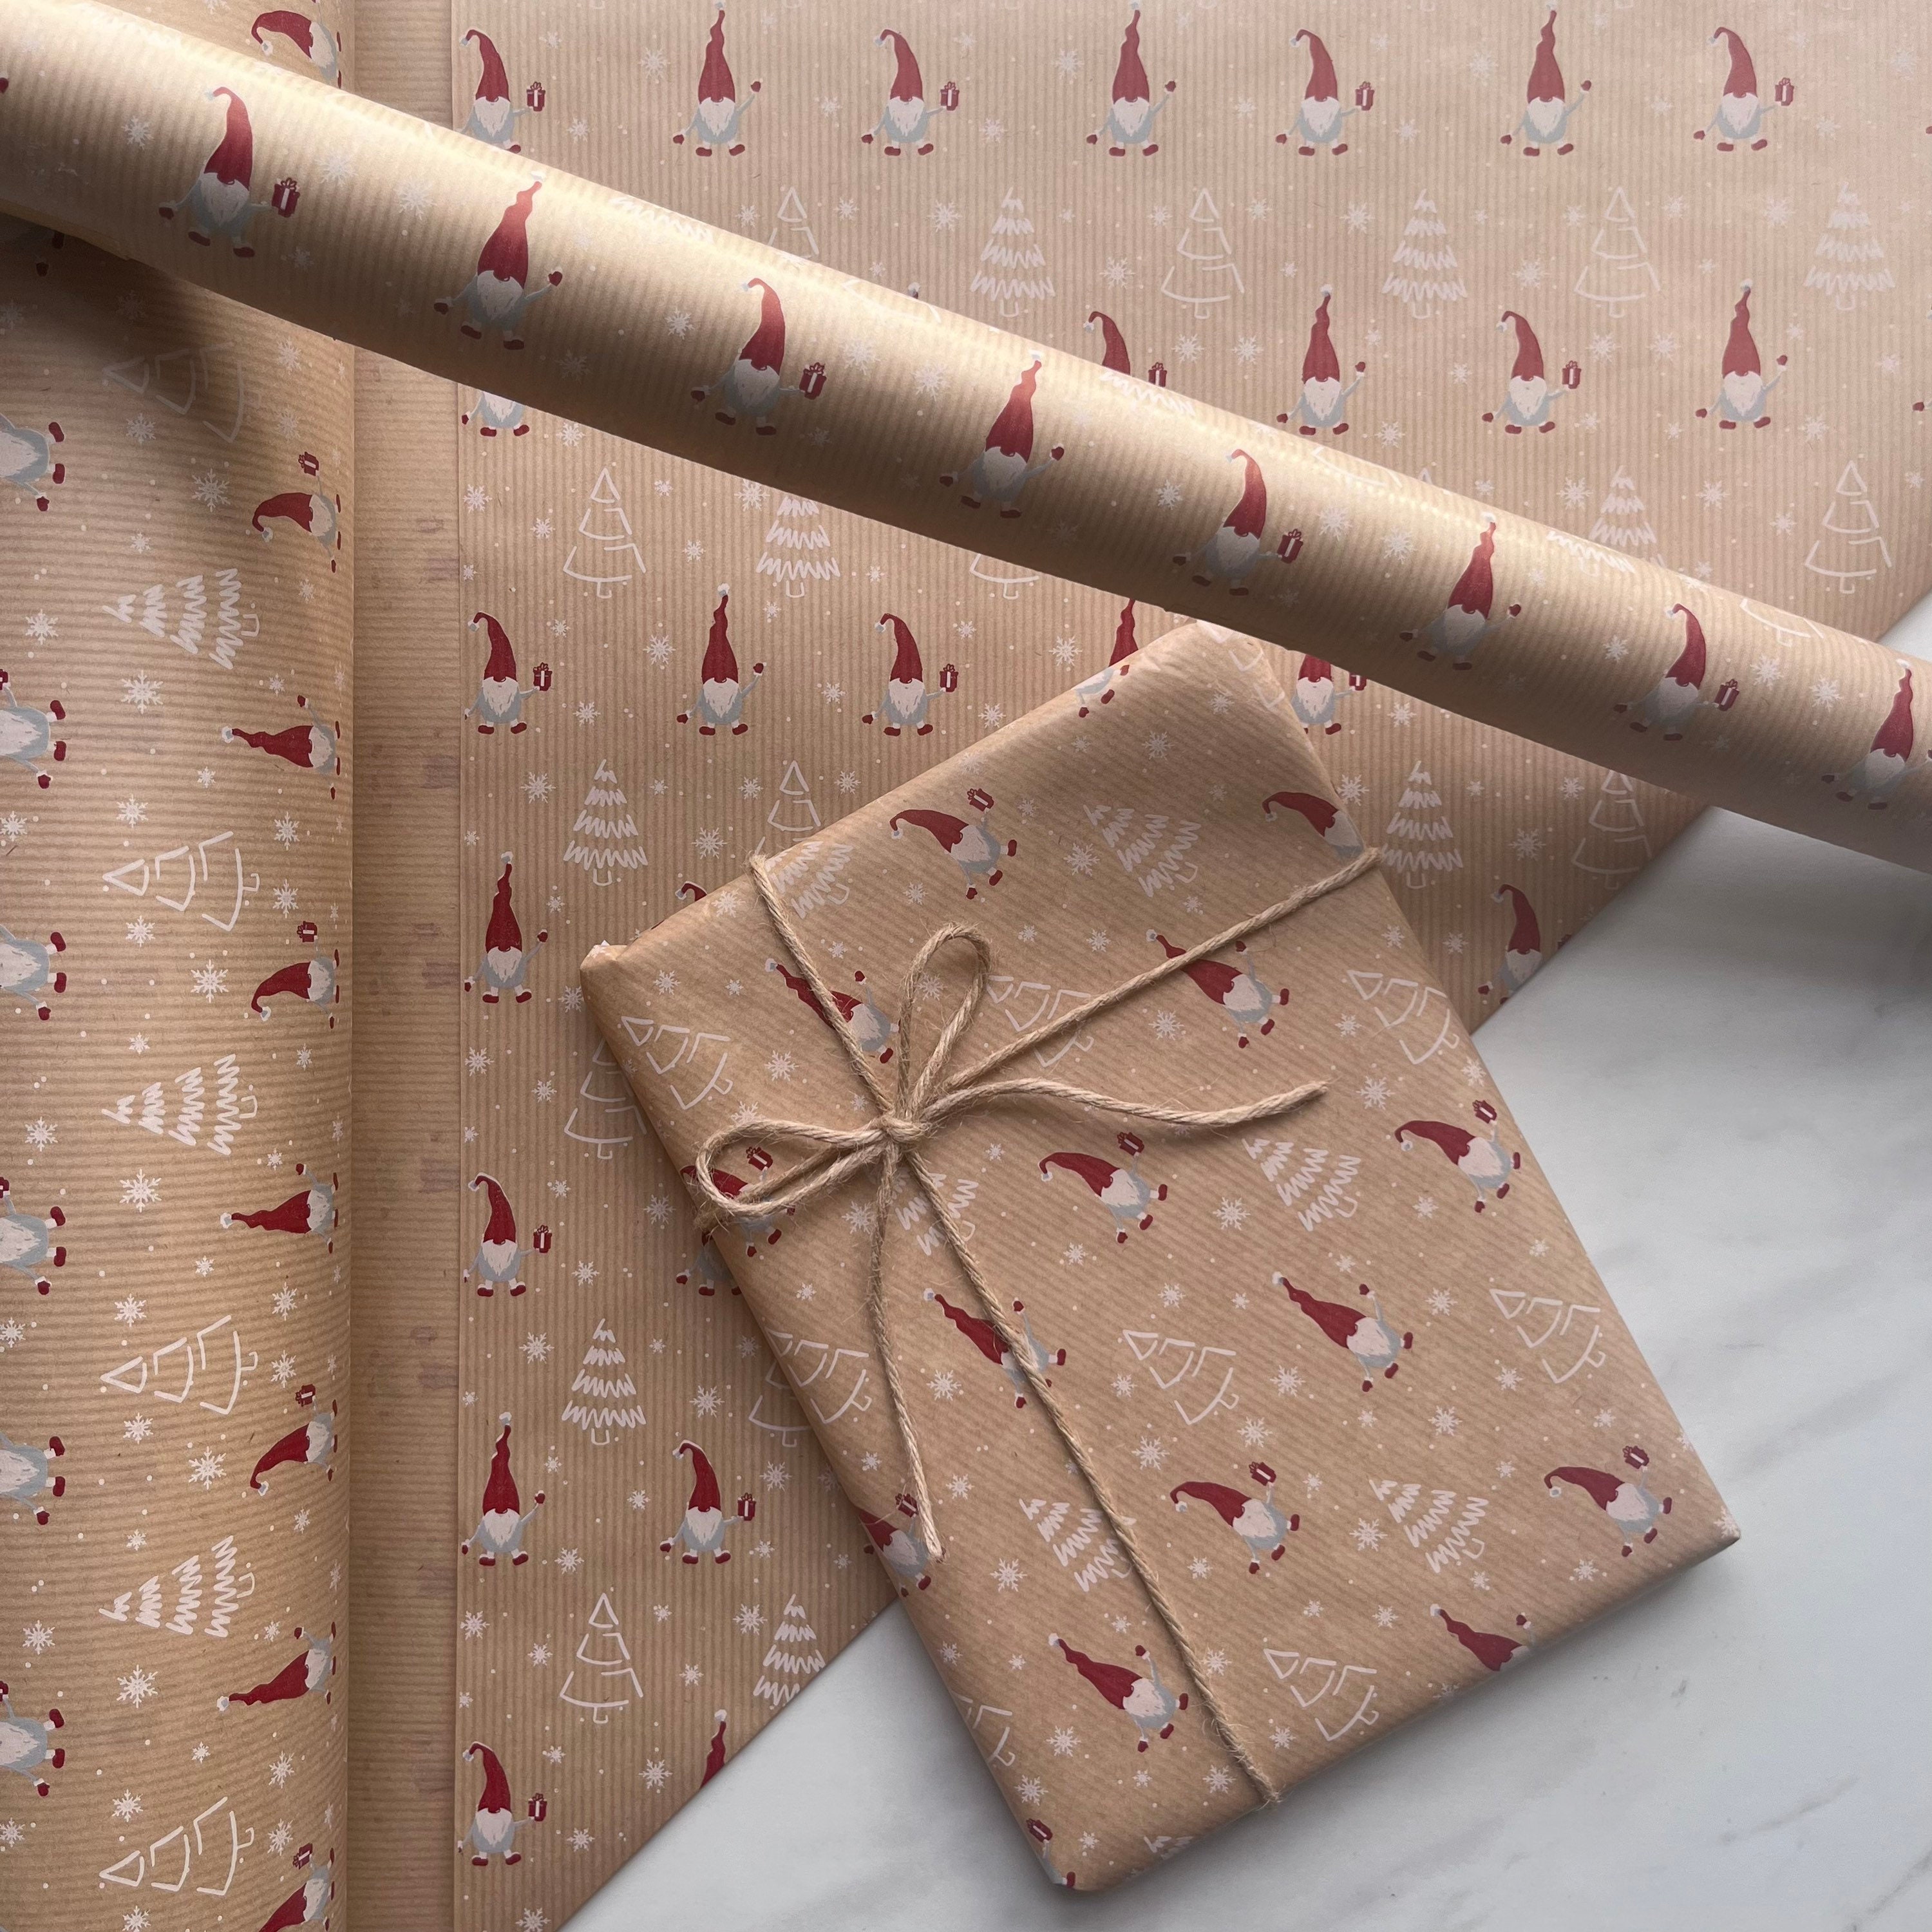 Kraft Brown Wrapping Paper, Recyclable Patterned Wrapping Paper, Brown  Wrapping Paper, Kraft Paper Gift Wrap Sheet, 70cm X 50cm -  Sweden